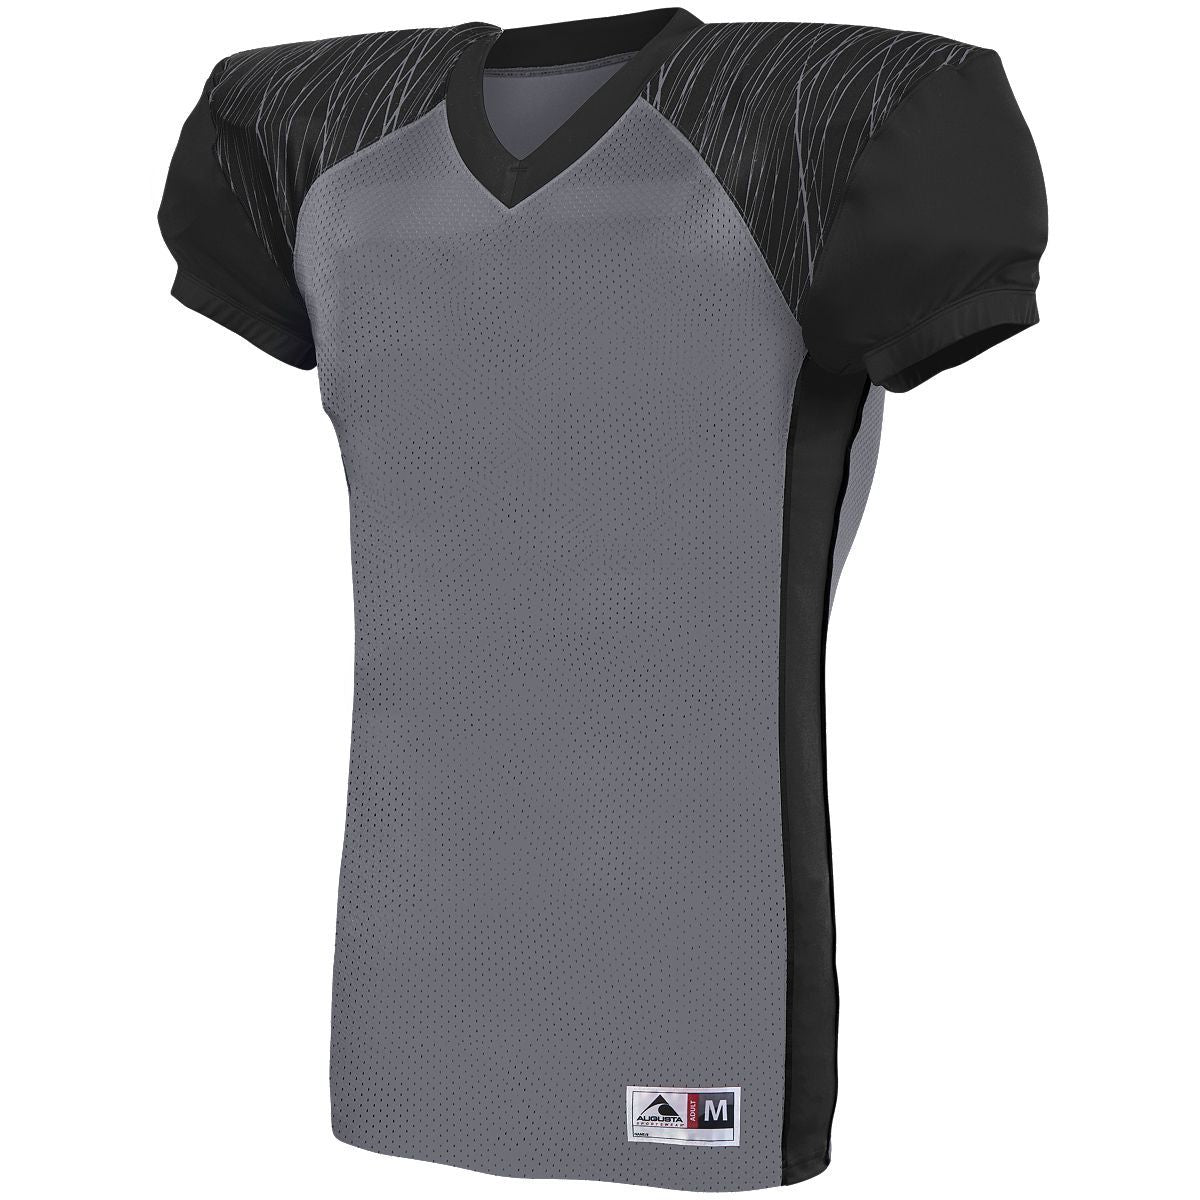 Augusta Sportswear Zone Play Jersey in Graphite/Black/Graphite Print  -Part of the Adult, Adult-Jersey, Augusta-Products, Football, Shirts, All-Sports, All-Sports-1 product lines at KanaleyCreations.com